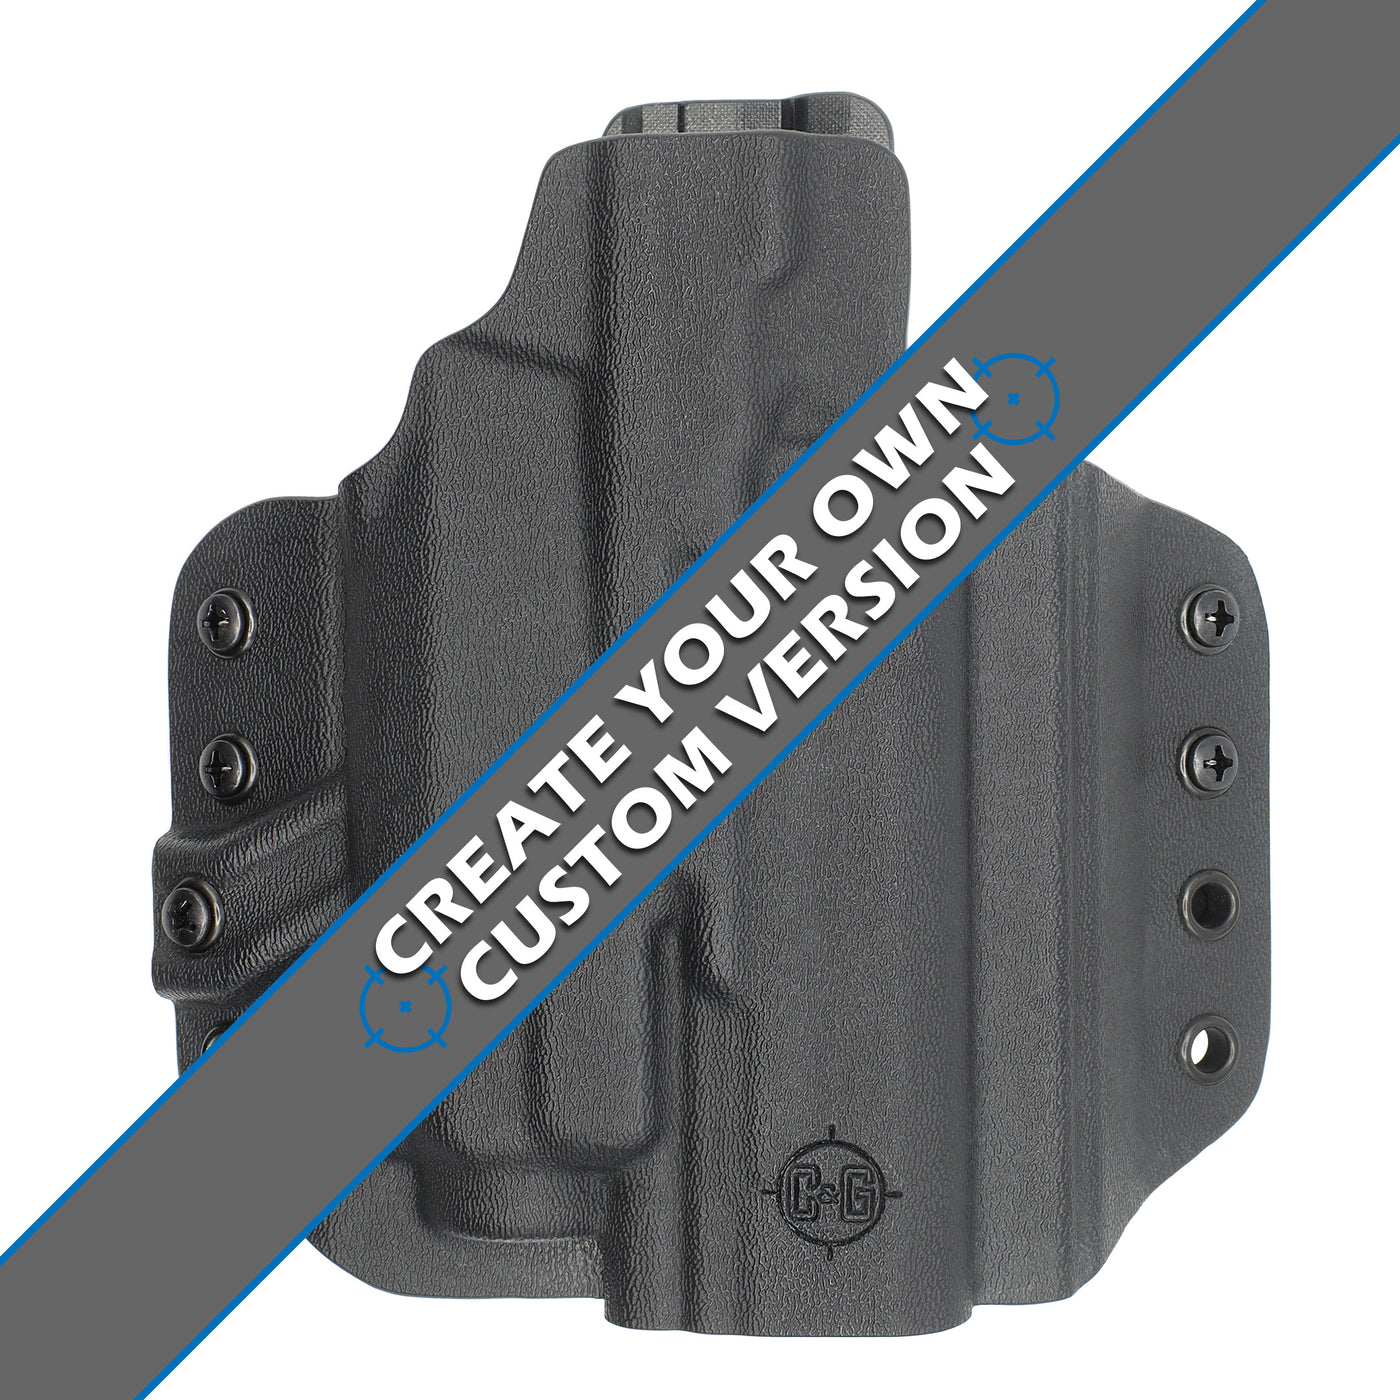 C&G Holsters custom OWB tactical M&P 9/40 streamlight TLR8